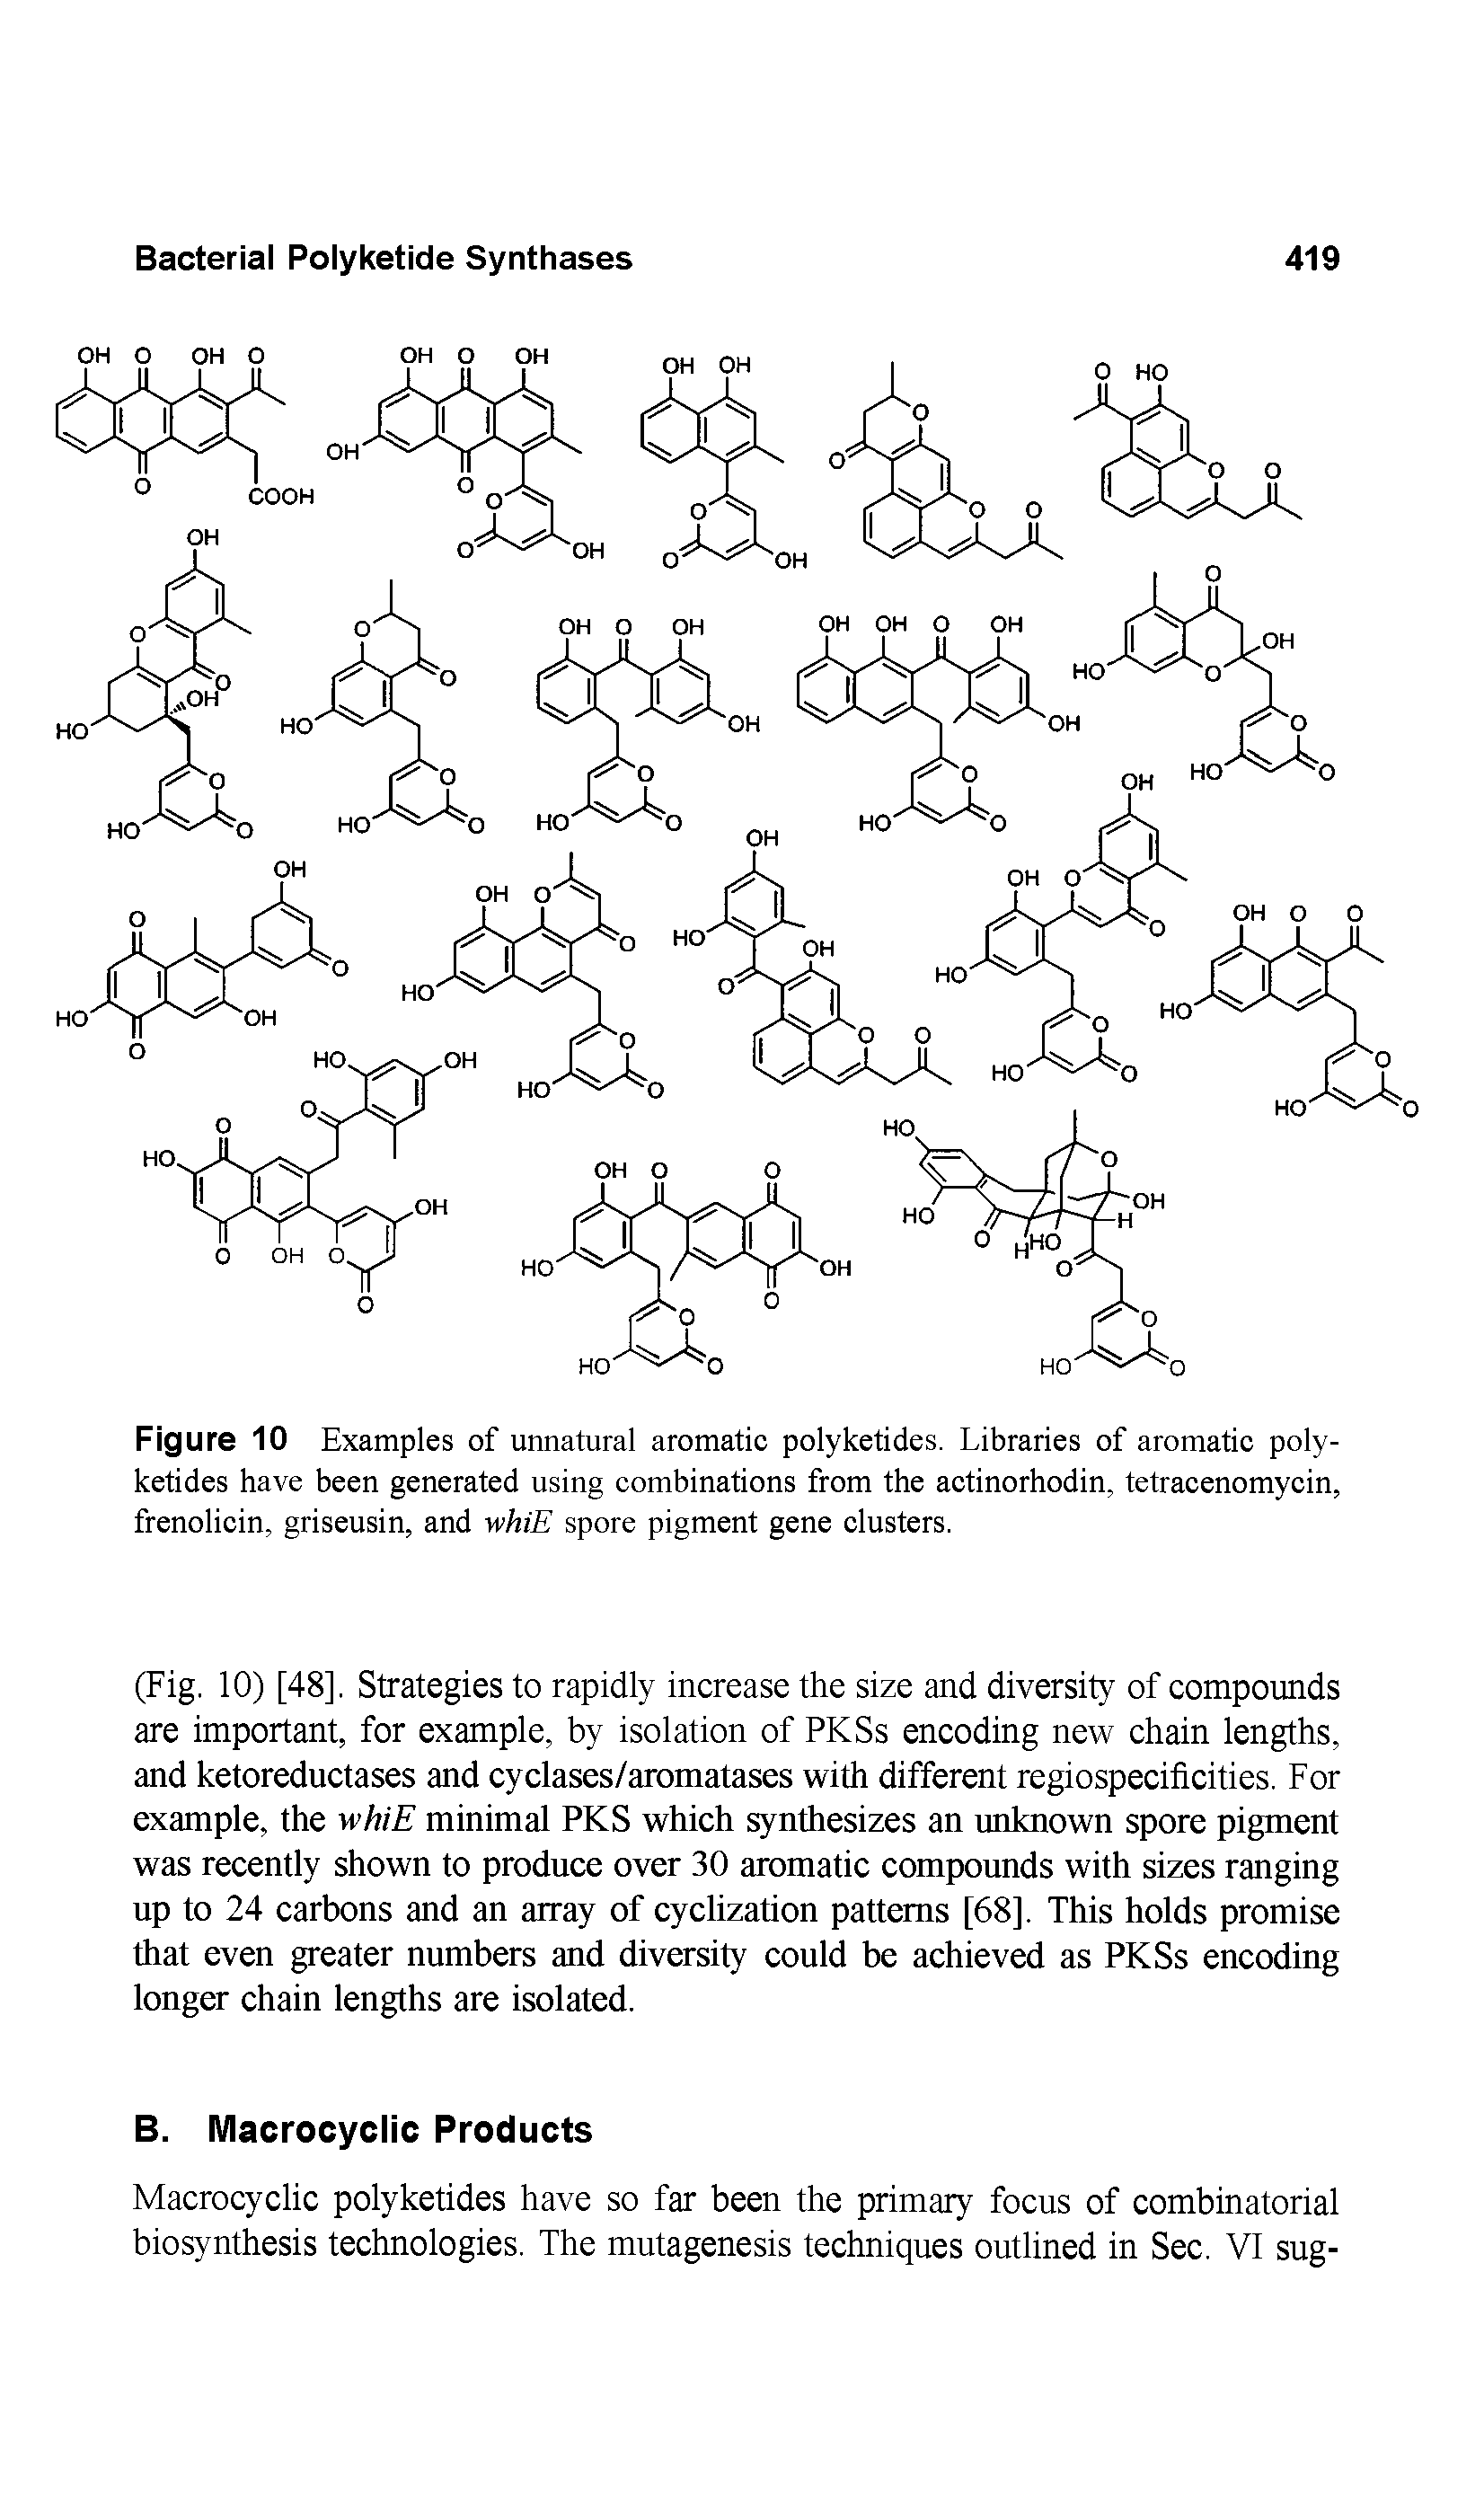 Figure 10 Examples of unnatural aromatic polyketides. Libraries of aromatic poly-ketides have been generated using combinations from the actinorhodin, tetracenomycin, frenolicin, griseusin, and whiE spore pigment gene clusters.